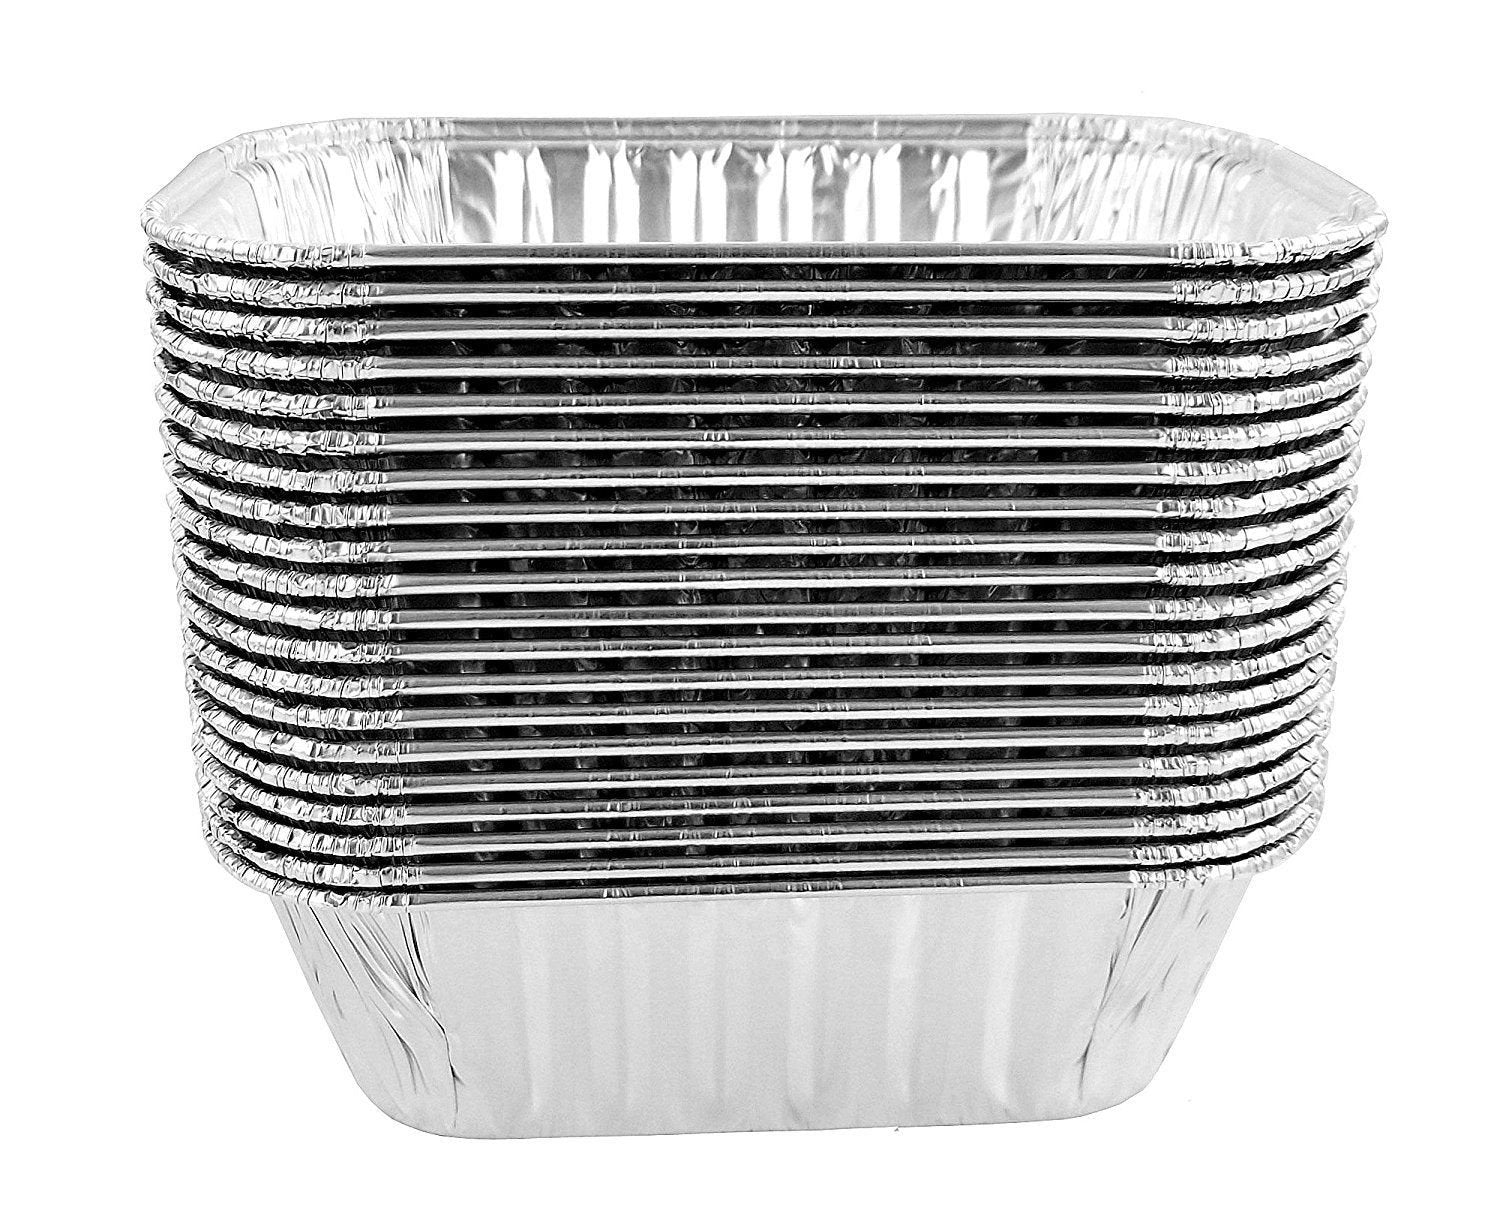 50-pack aluminum foil mini loaf pans with lids for baking muffins